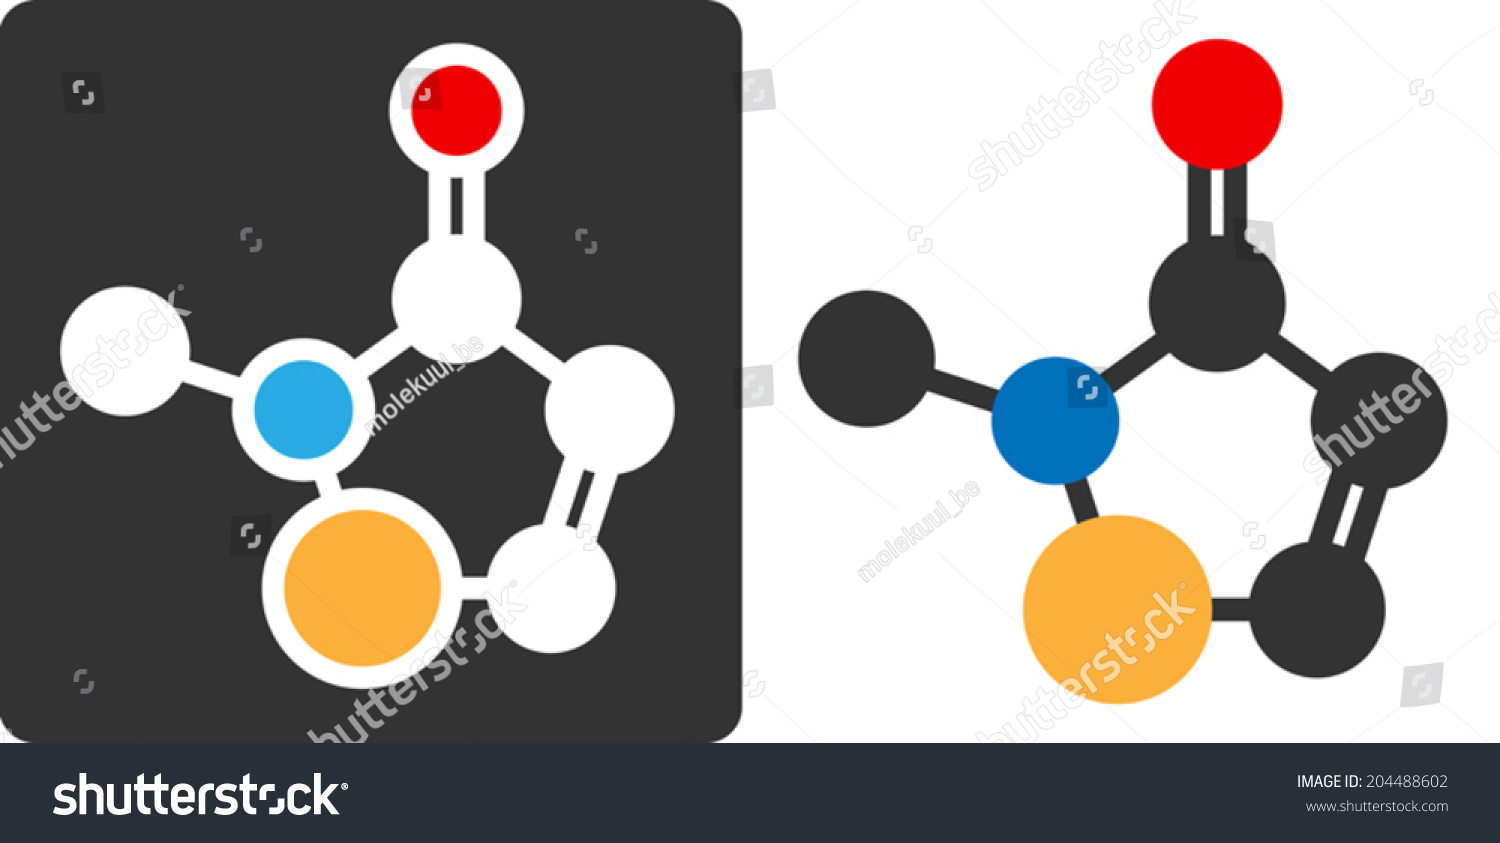 SVG of Methylisothiazolinone (MIT, MI) preservative molecule, flat icon style. Atoms shown as color-coded circles (oxygen - red, carbon - white/grey, sulfur - yellow, nitrogen - blue, hydrogen - hidden).	 svg